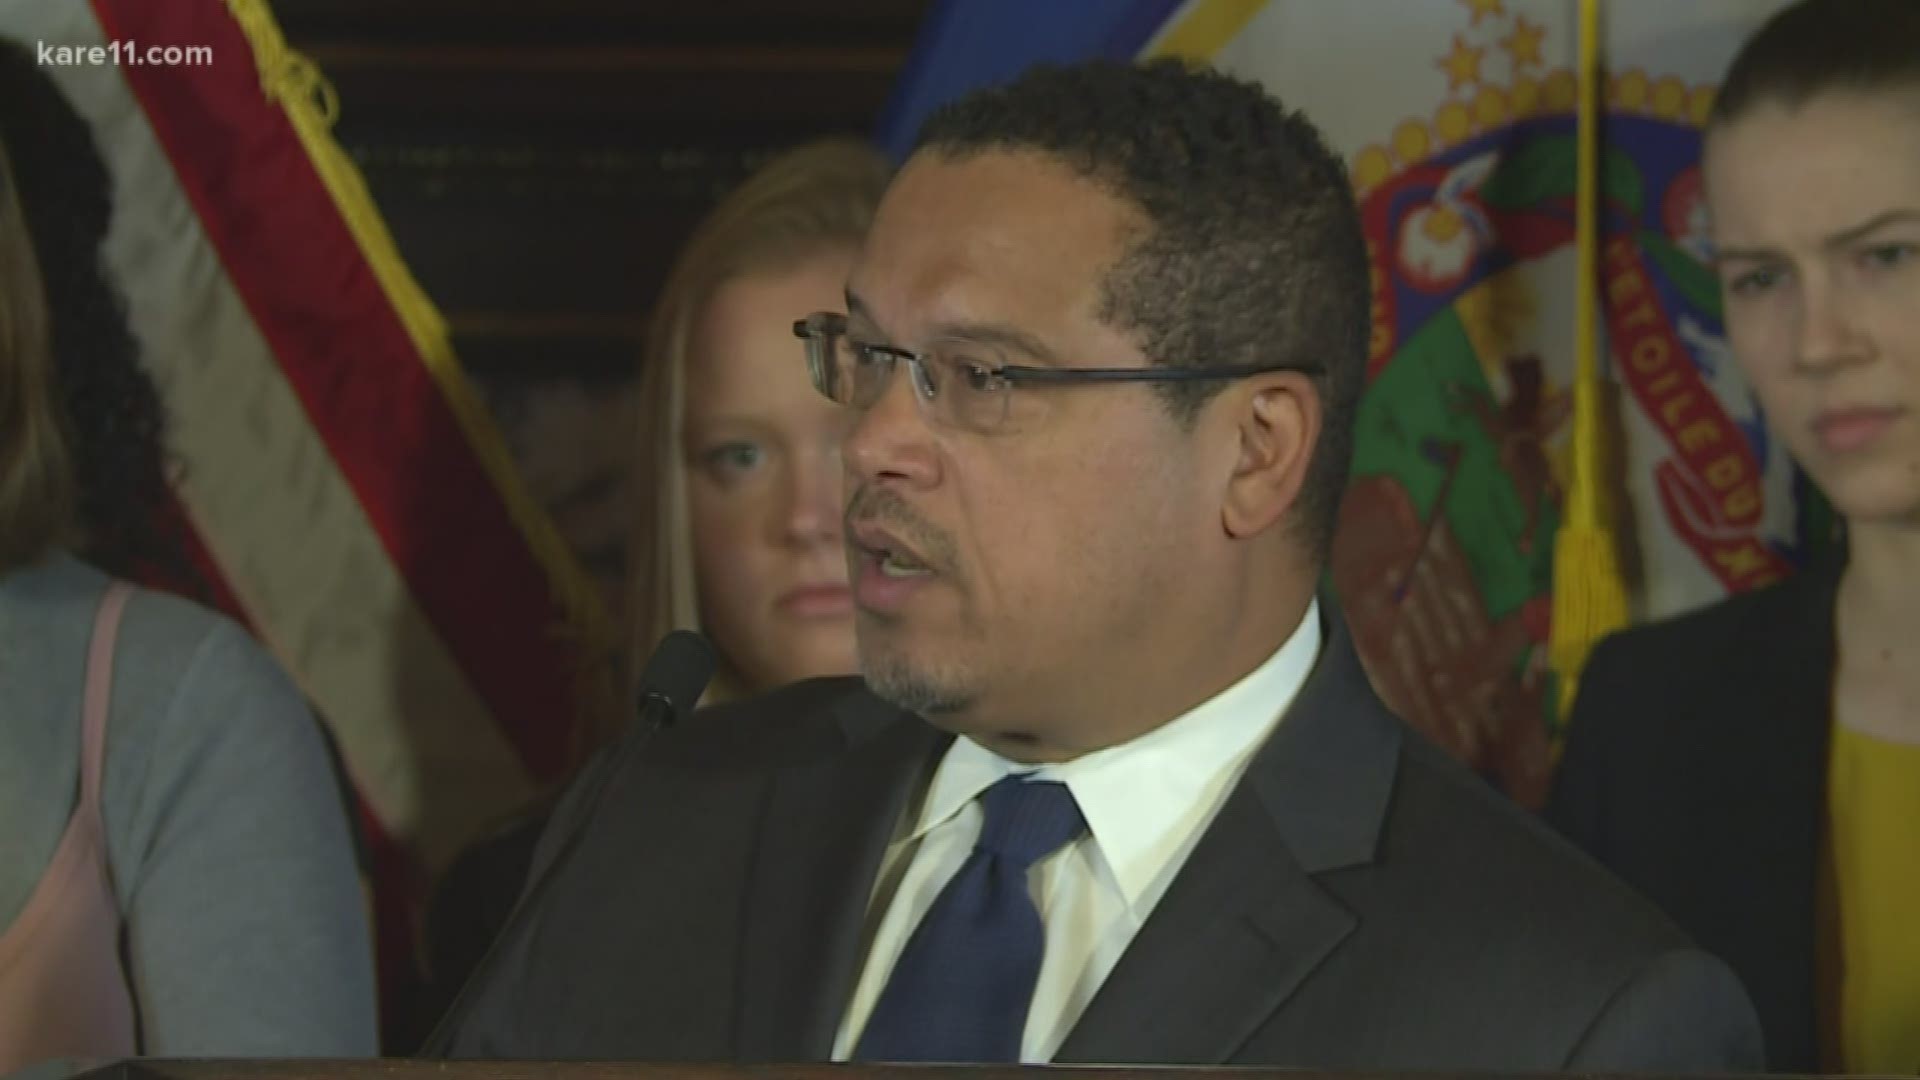 Minn. Atty. Gen. Keith Ellison filed a lawsuit against the world's largest e-cig maker, Juul Labs, alleging deceptive marketing and consumer protection violations